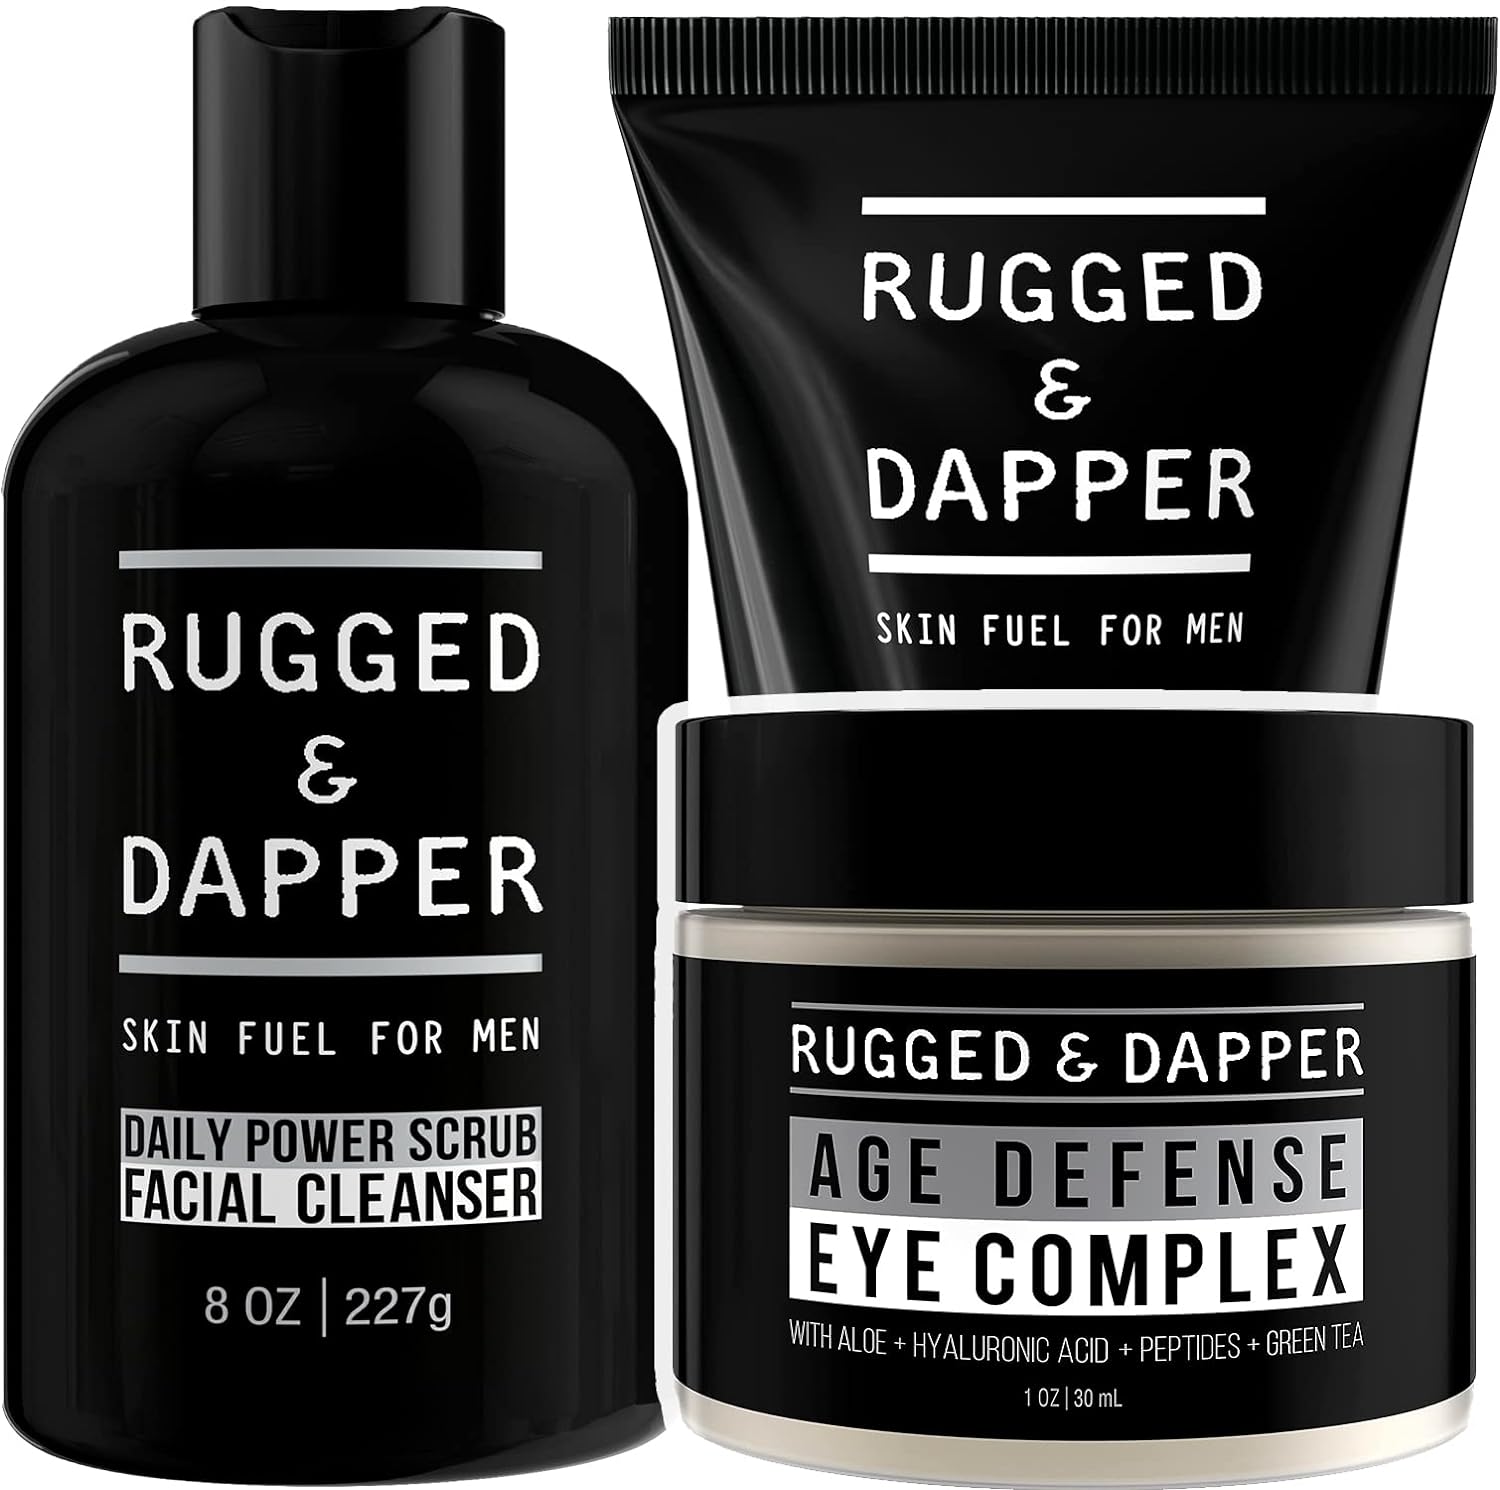 RUGGED & DAPPER - Daily Power Scrub Facial Cleanser, Age + Damage Defense Face Moisturizer and Age Defense Eye Complex